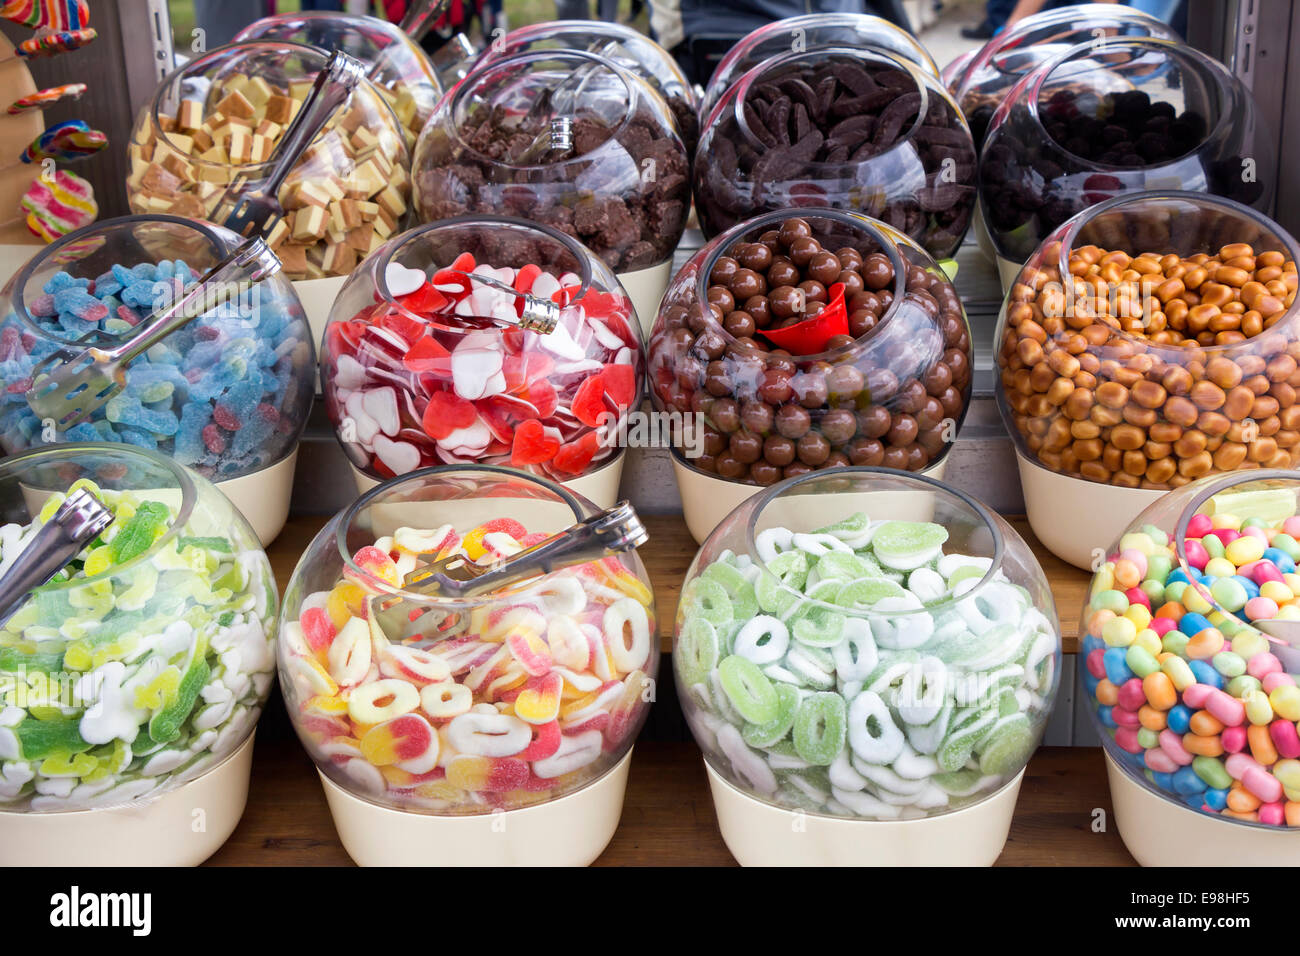 Assortment of colorful sweets and candies in glass bowls Stock Photo